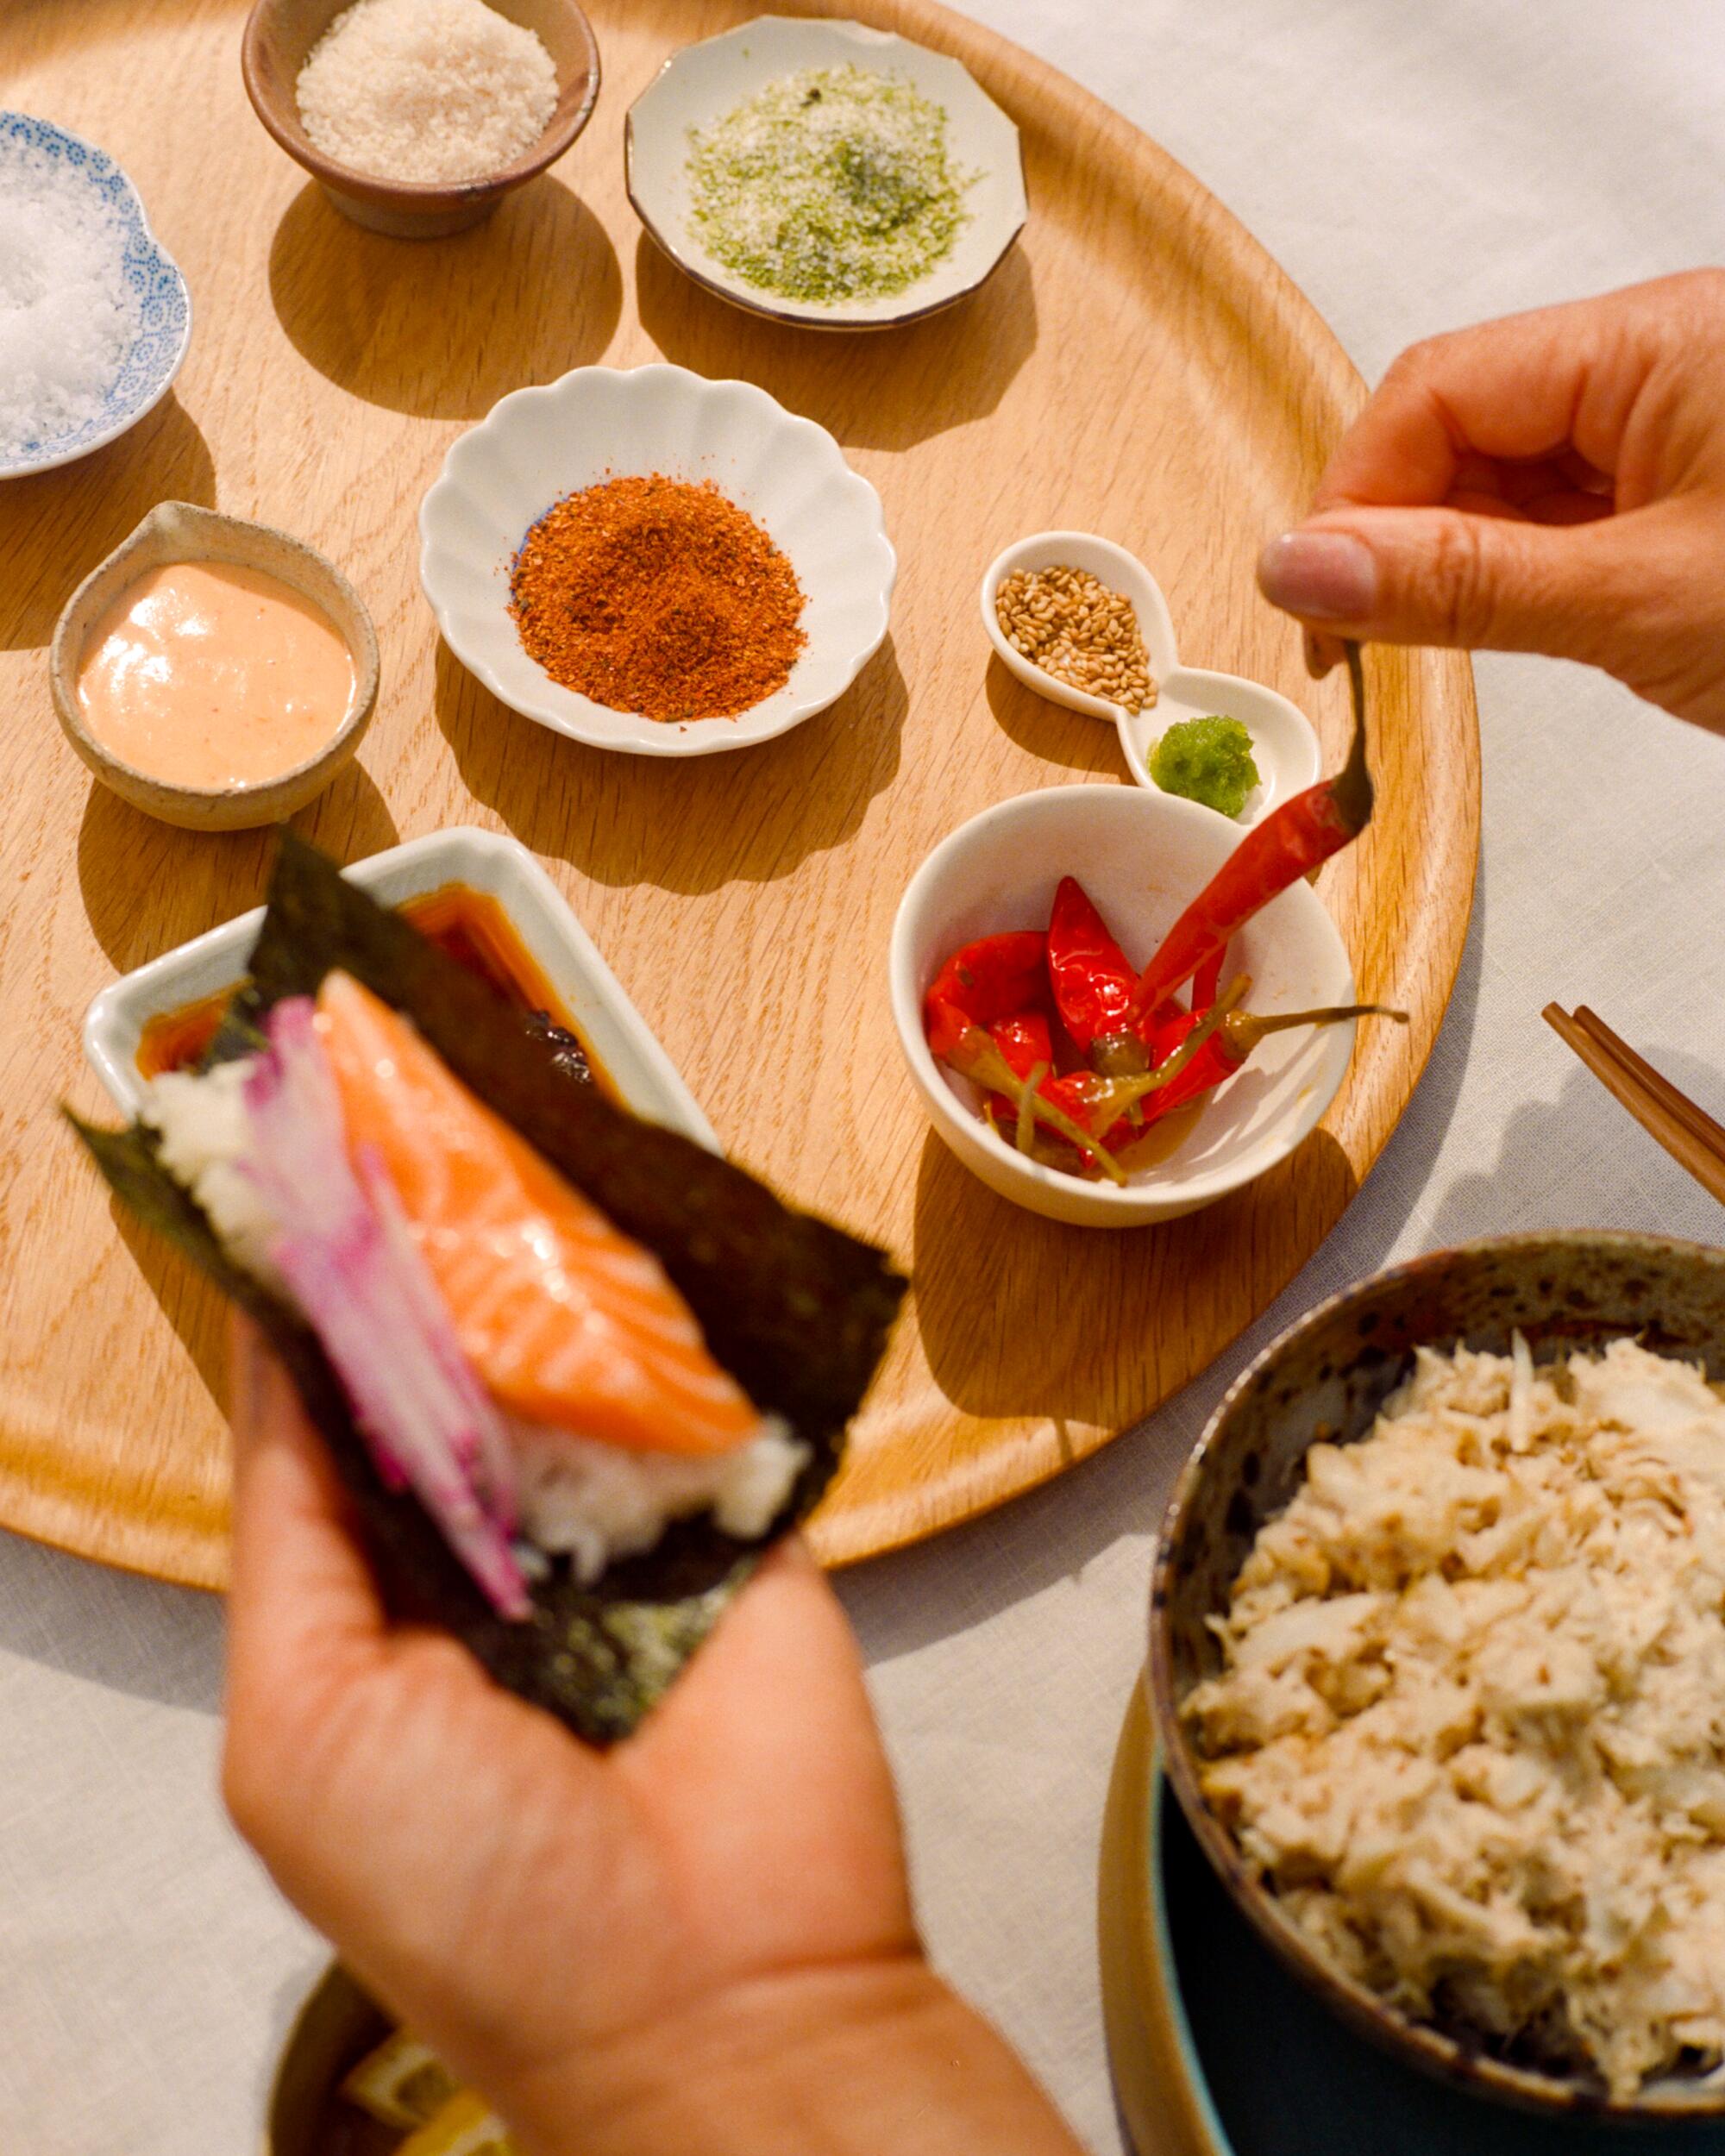 One hand holds a hand roll while the other hand loads up on condiments.